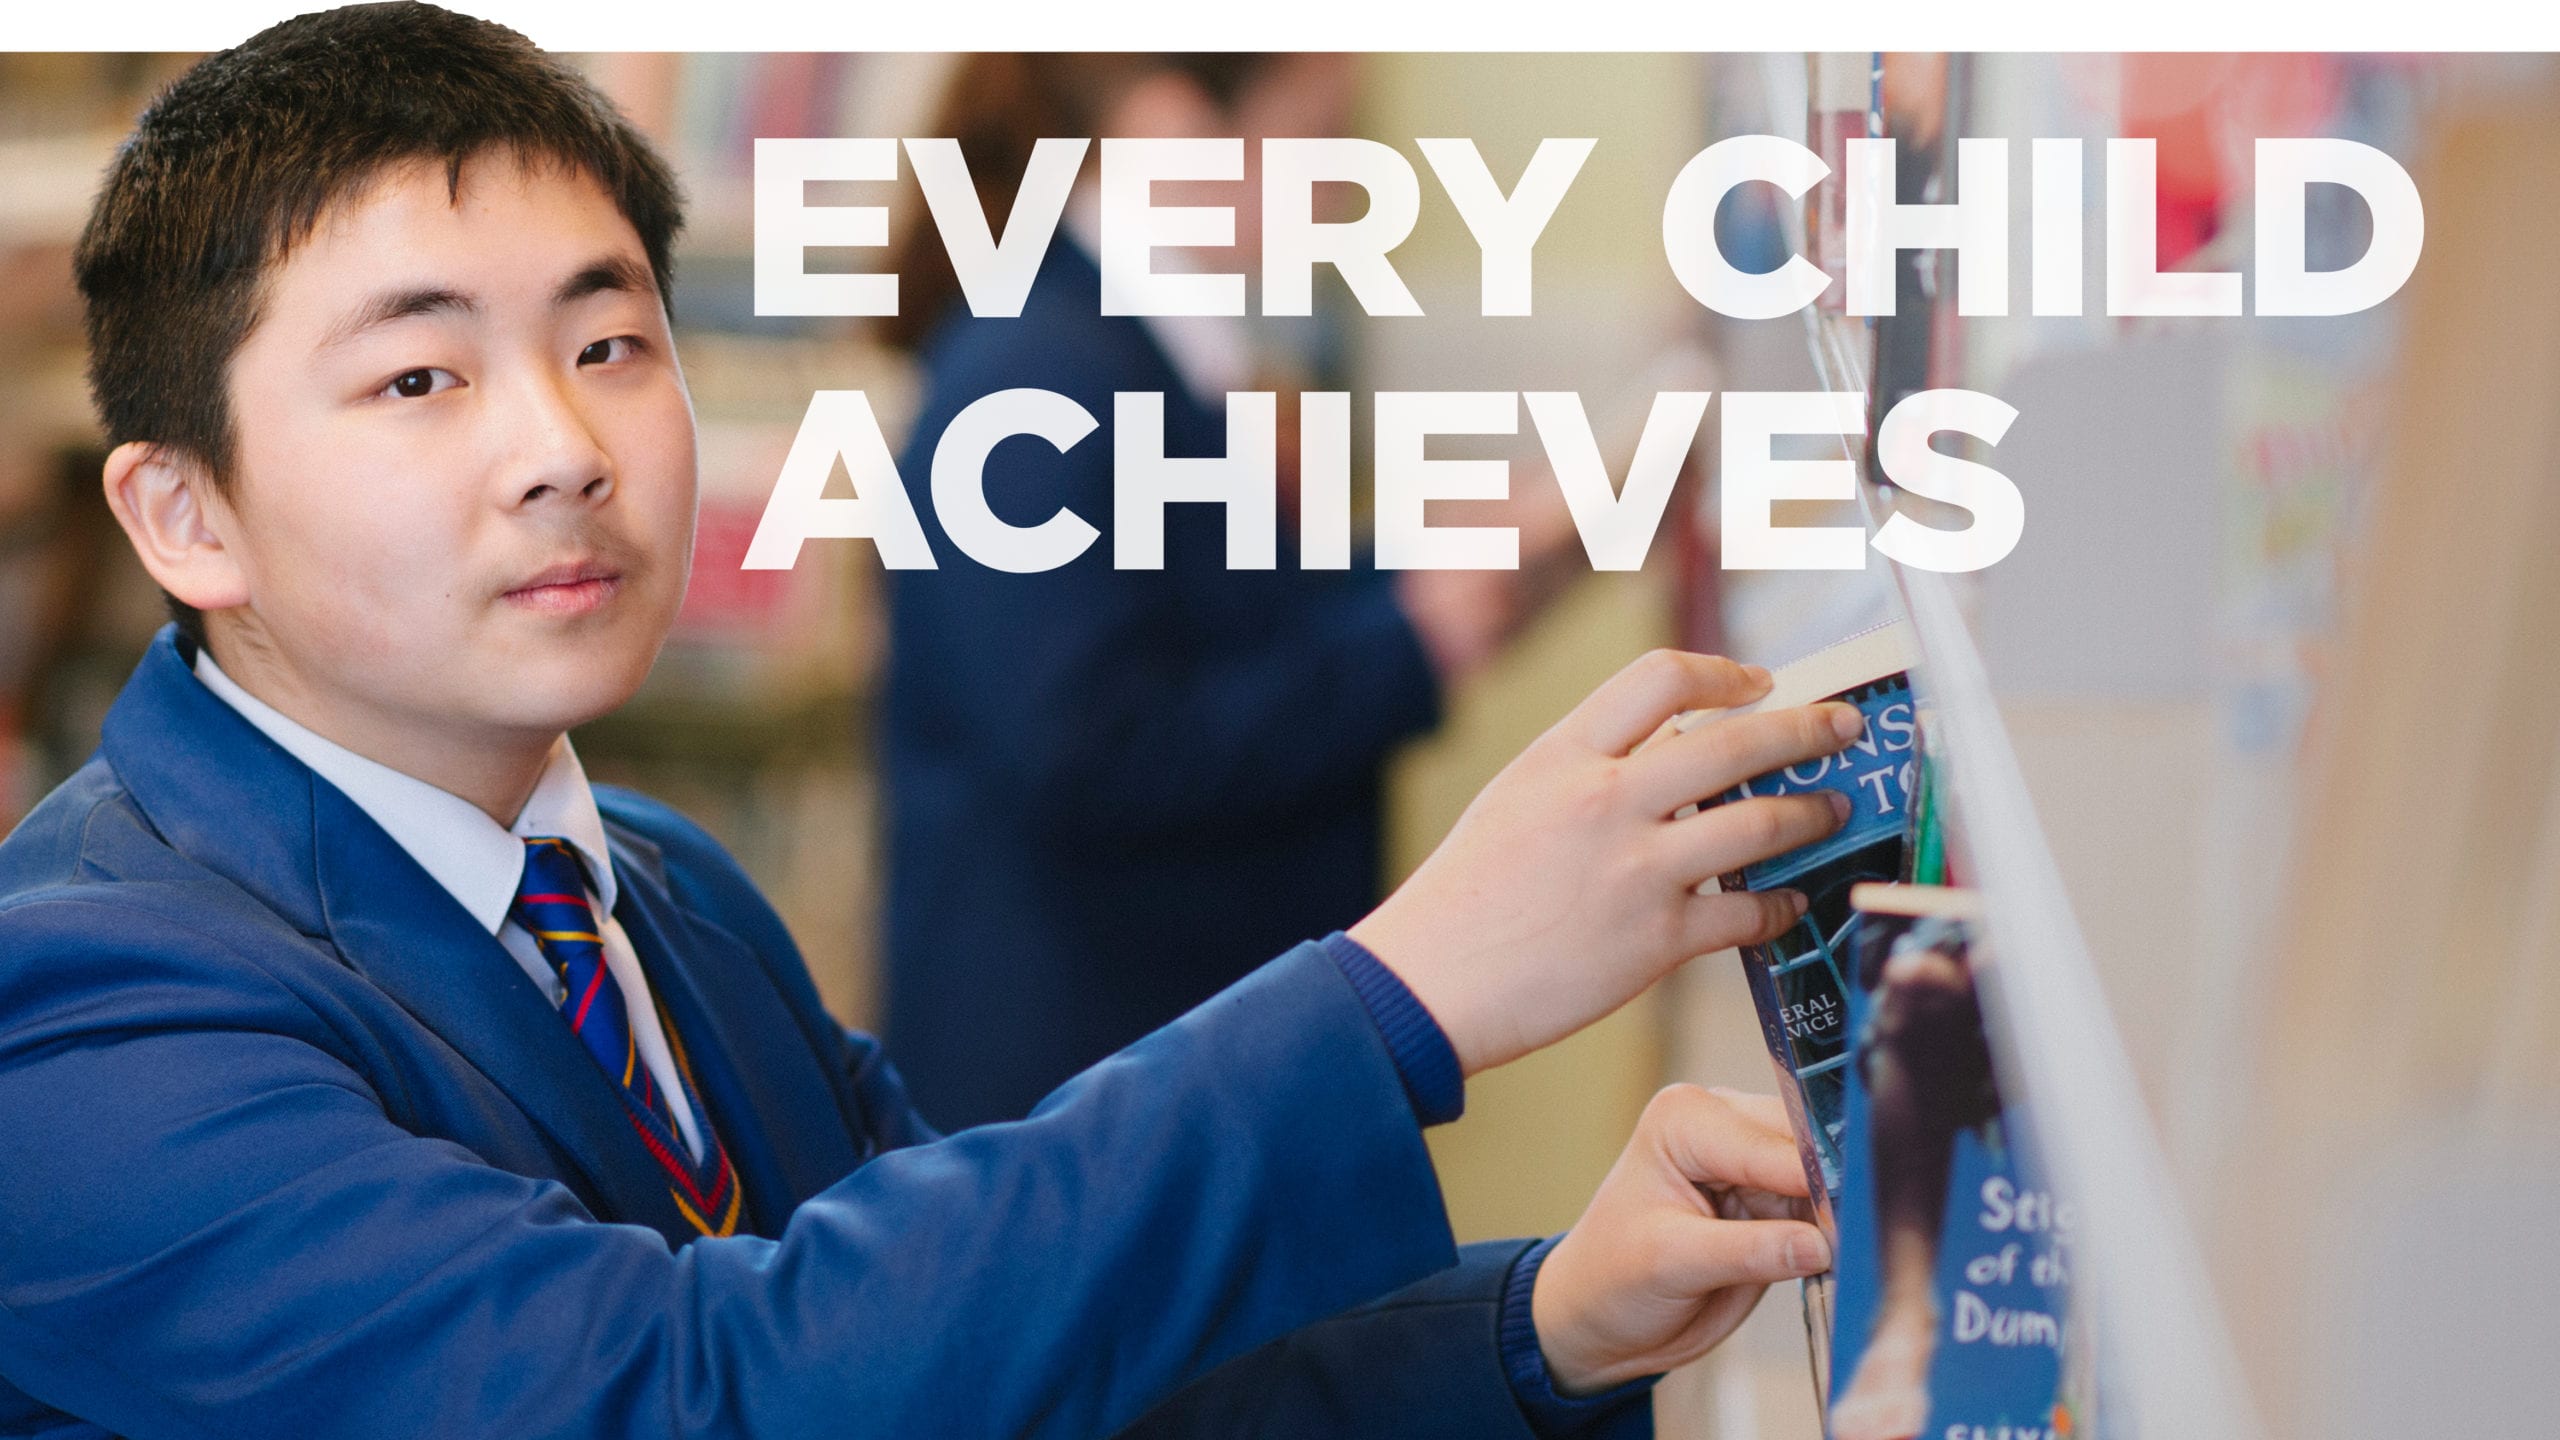 Every Child Achieves